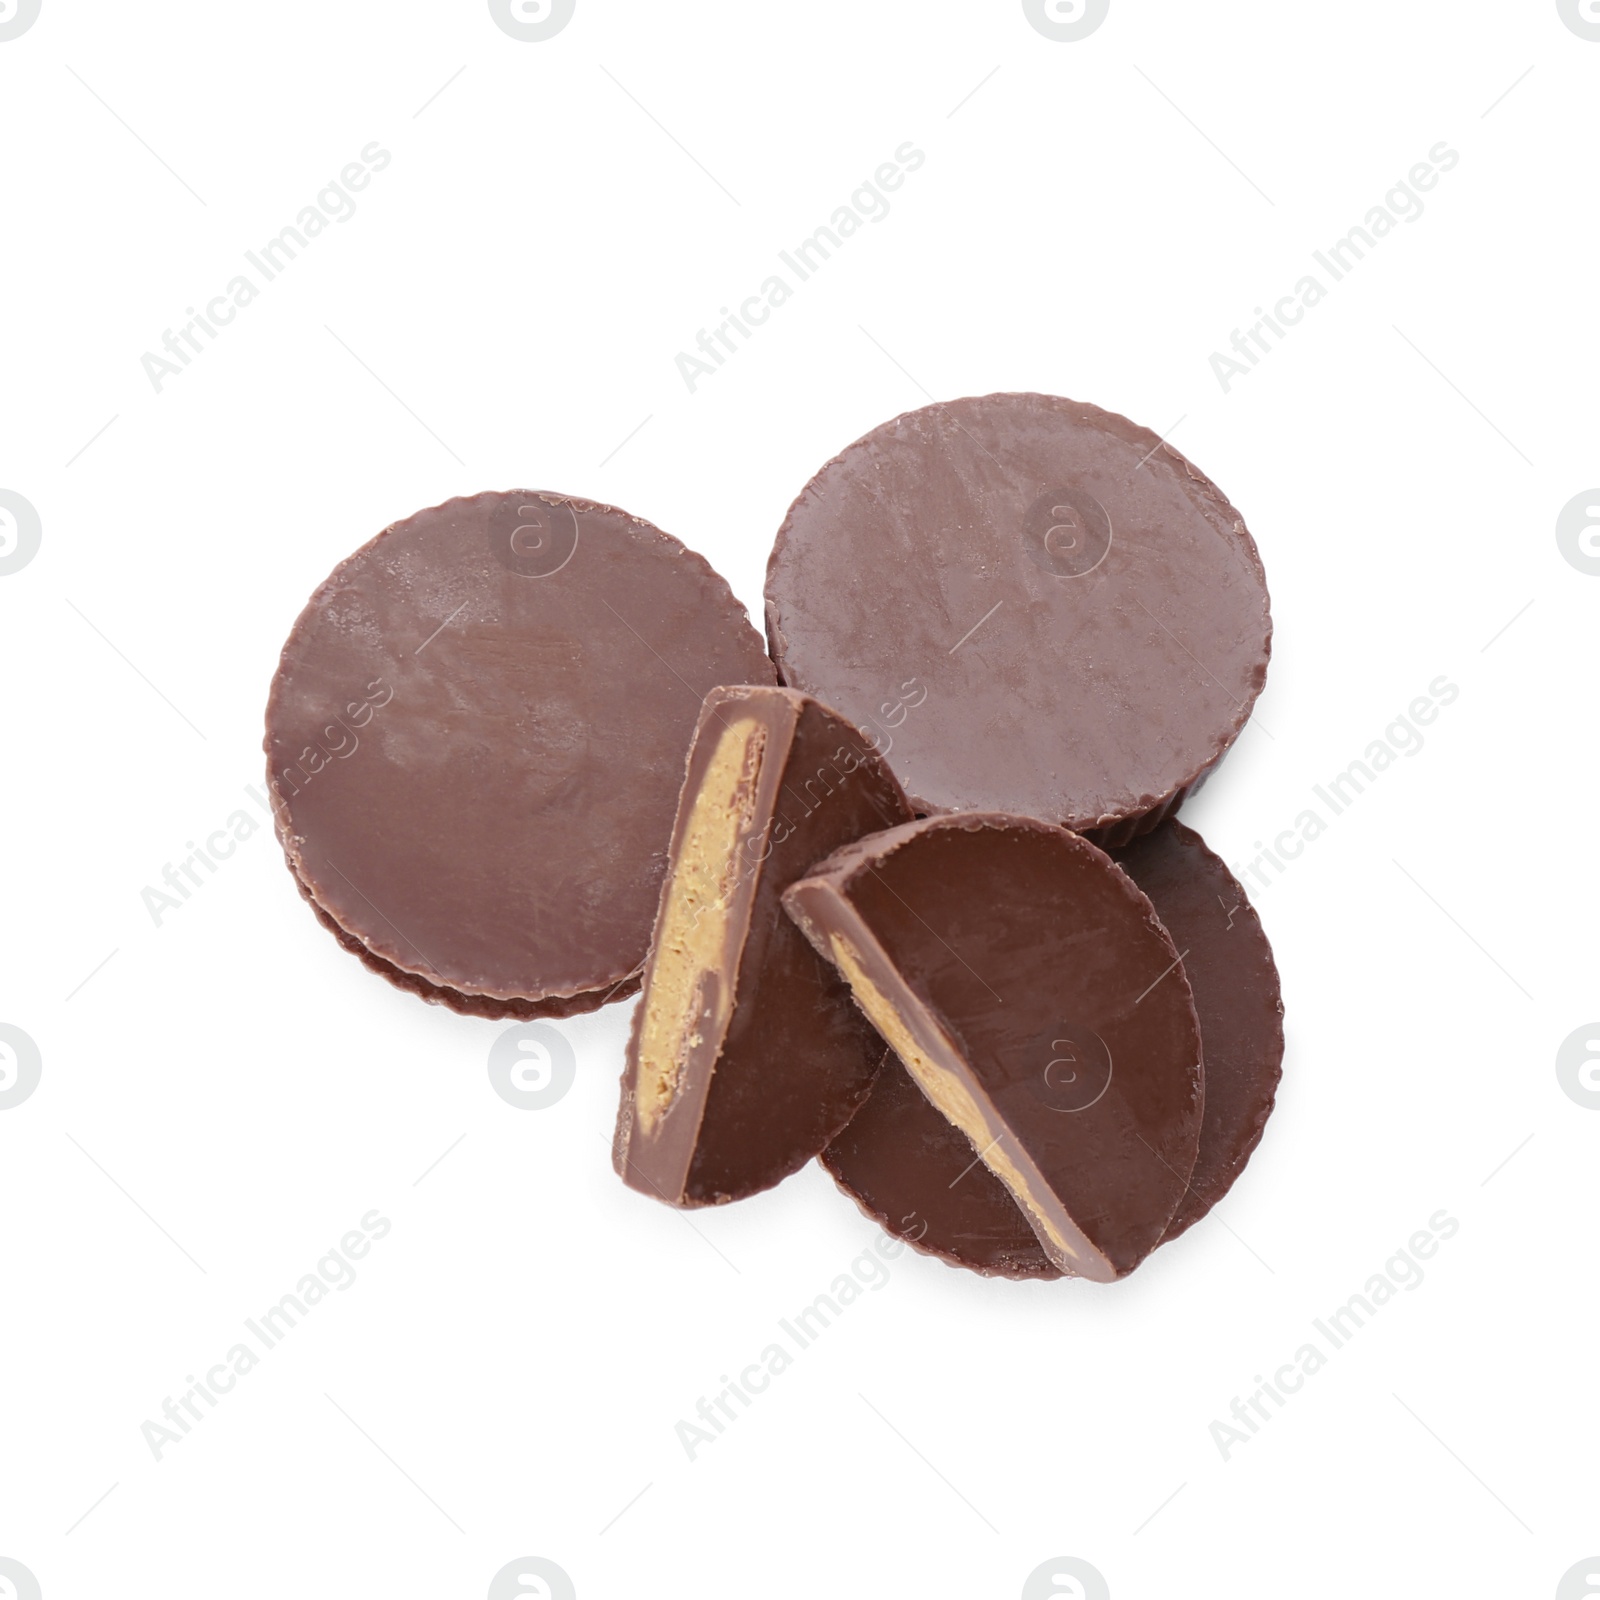 Photo of Cut and whole delicious peanut butter cups on white background, top view